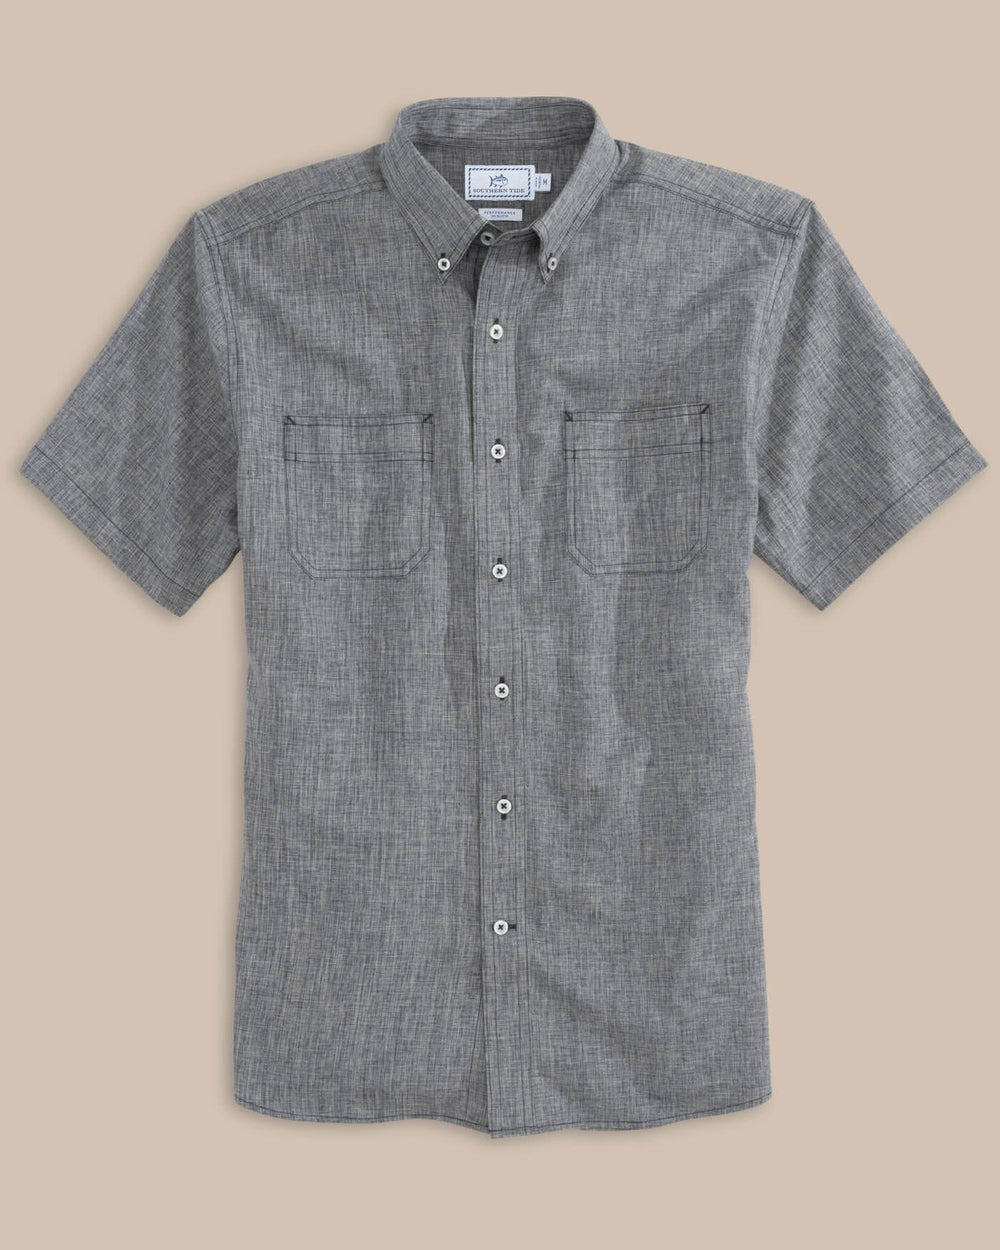 The front view of the Southern Tide Short Sleeve Dock Shirt by Southern Tide - Polarized Grey